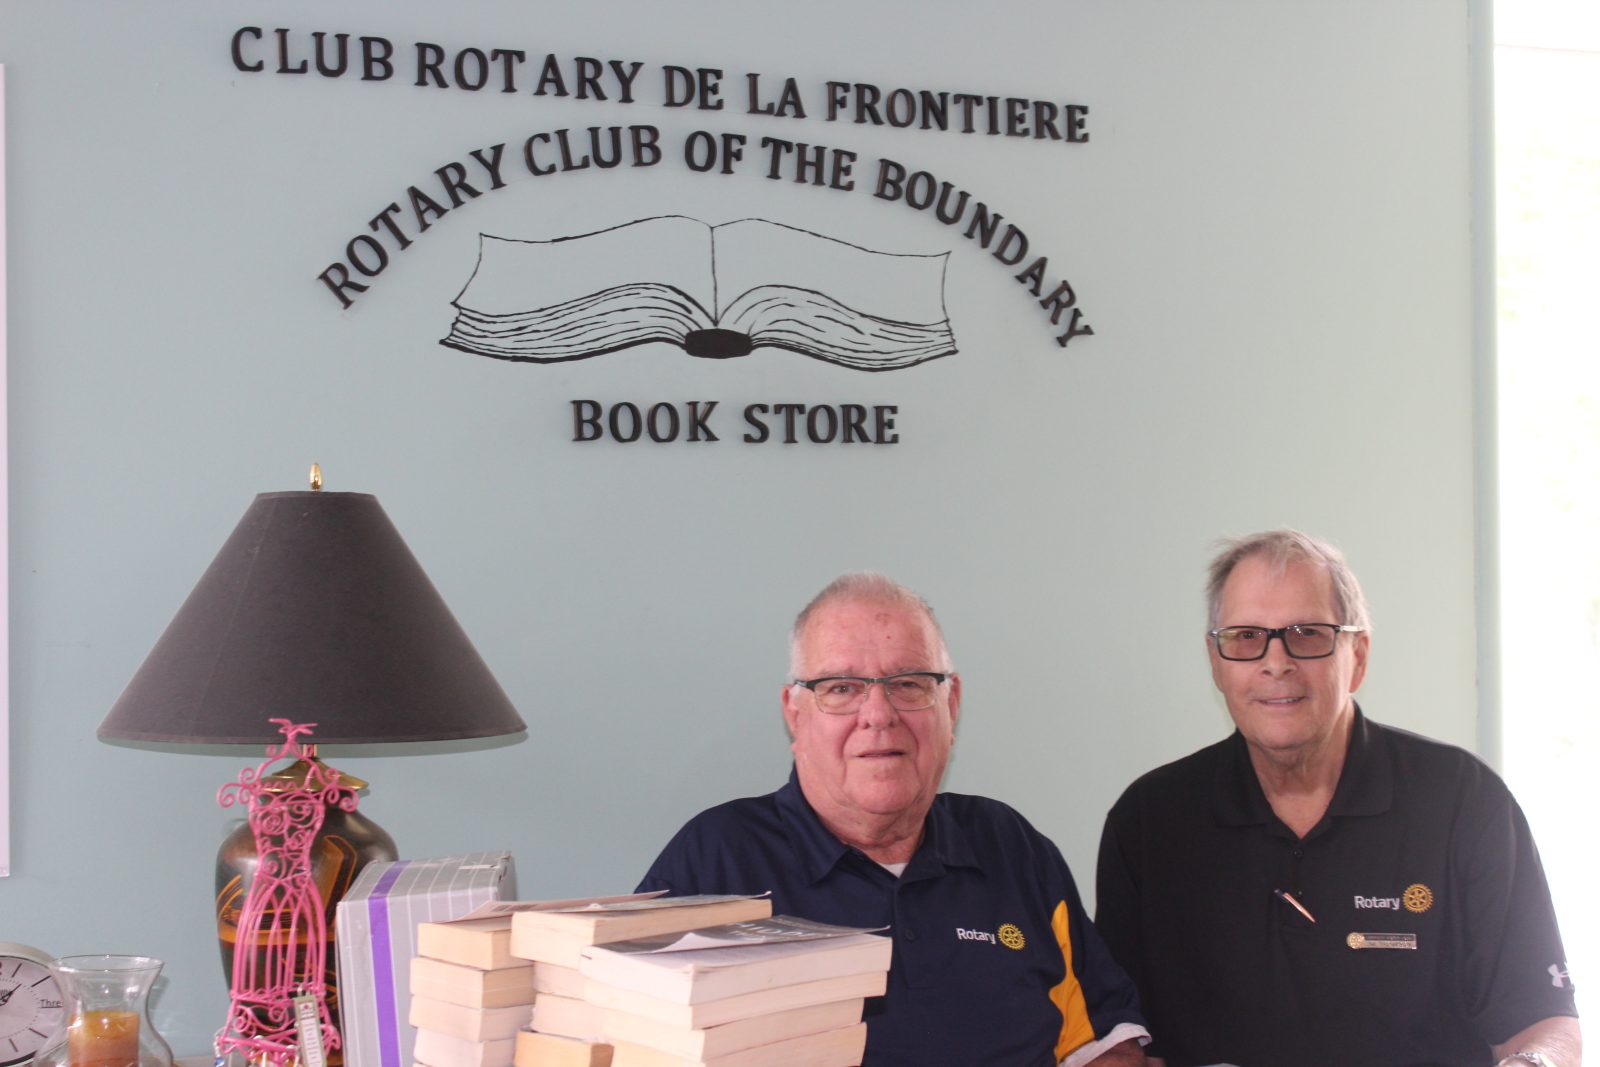 Boundary Rotary gives up charter, will continue book sales